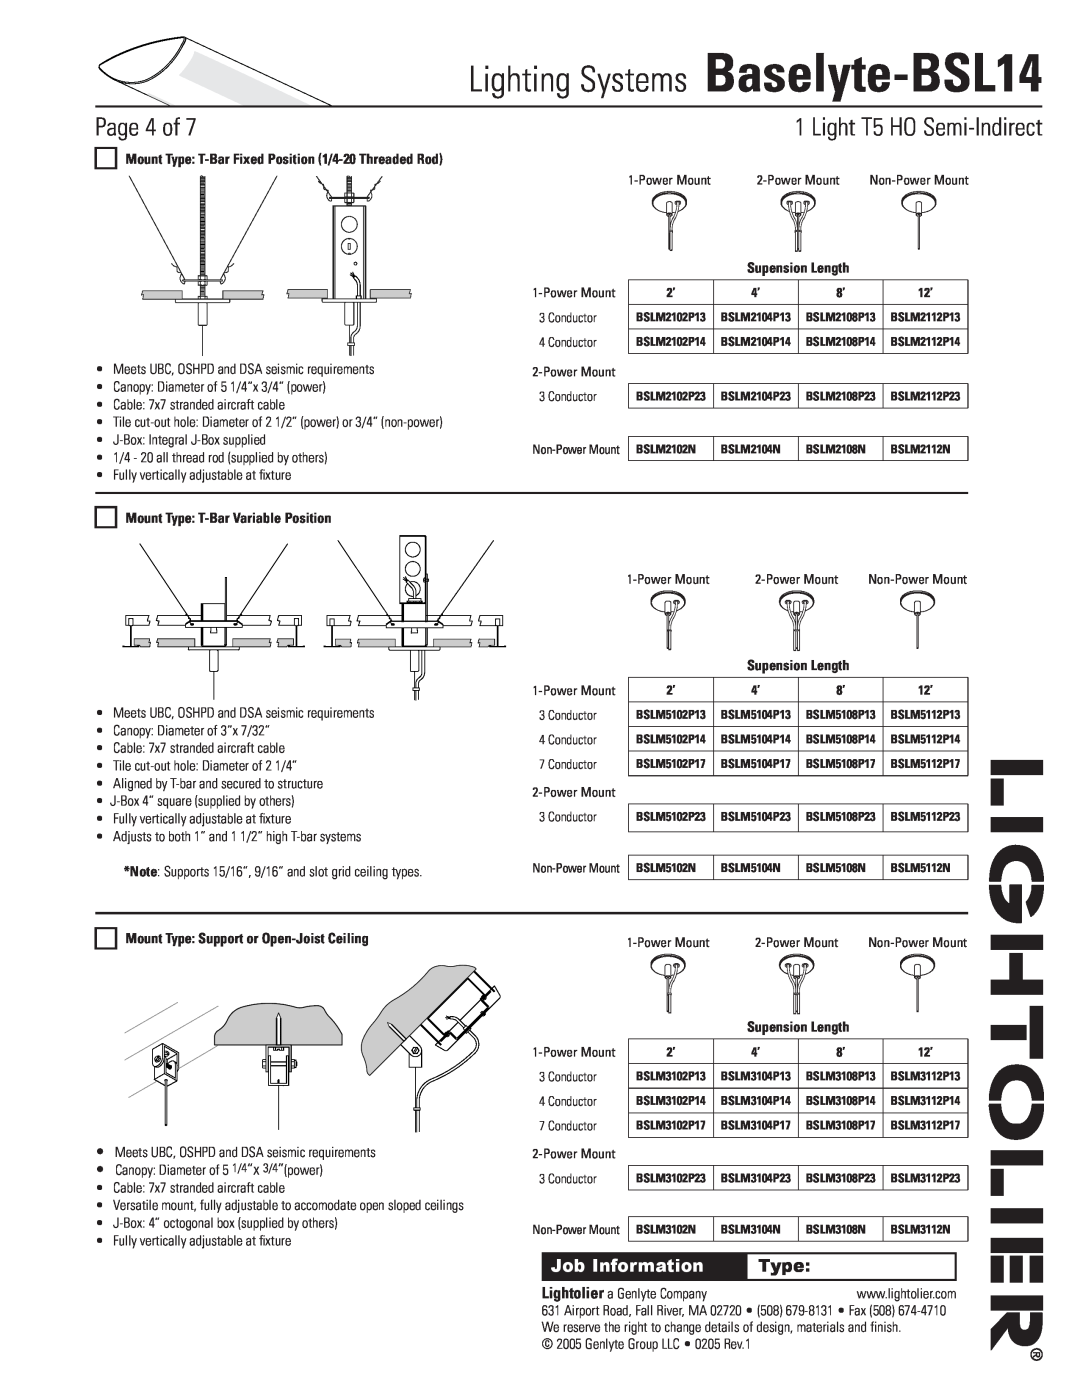 Lightolier Baselyte-BSL14 Mount Type T-BarVariable Position, Mount Type Support or Open-JoistCeiling, Page of 